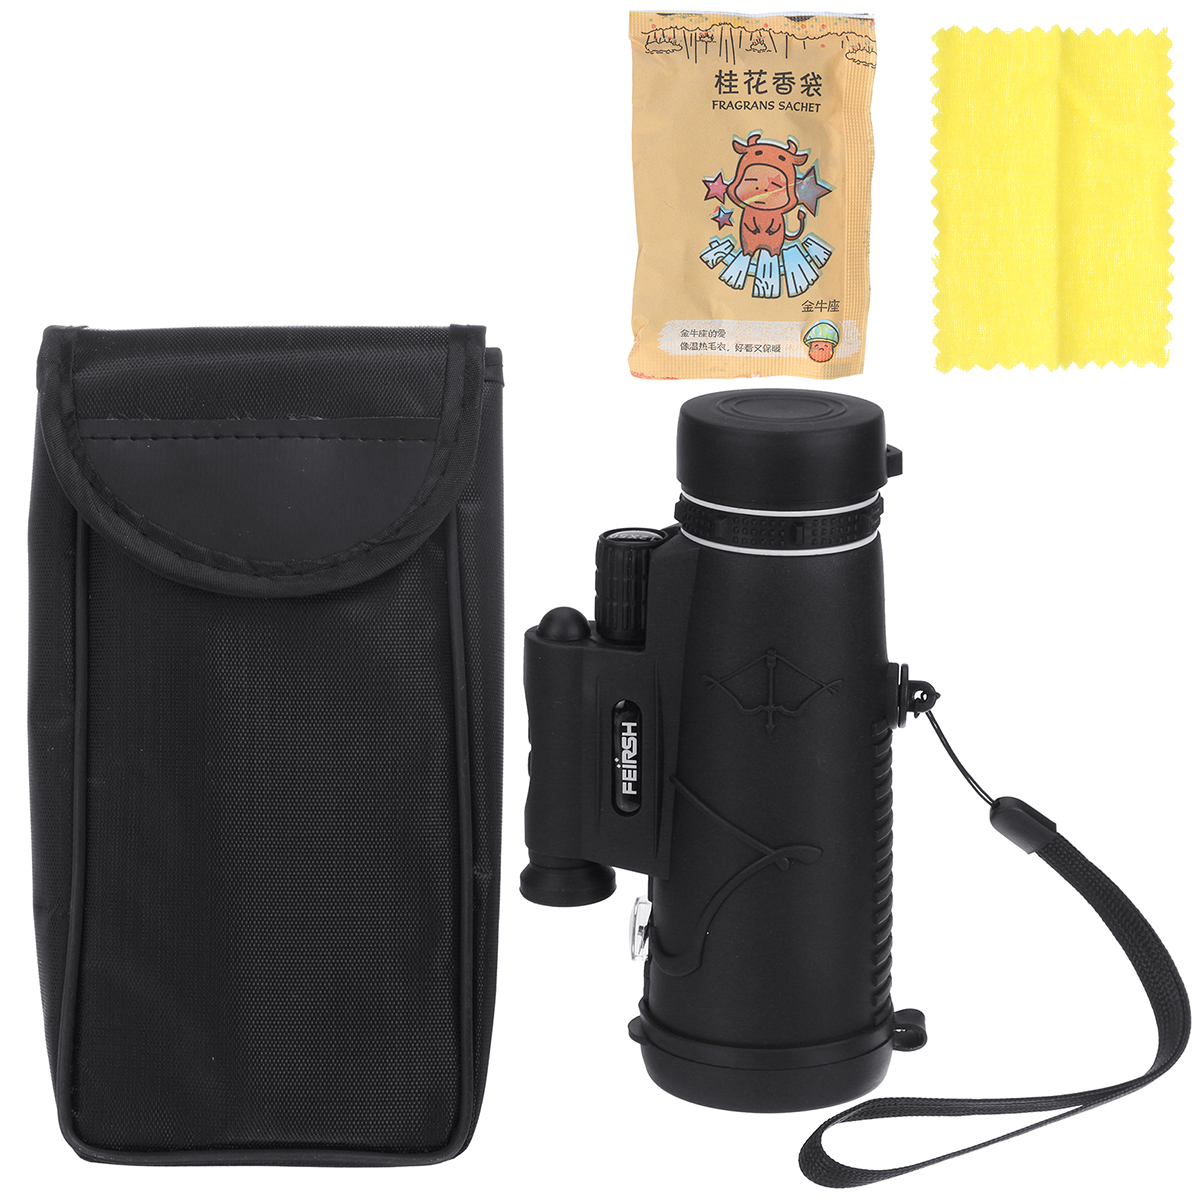 1250-High-Optical-Monocular-with-Laser-Night-Light-Function-Portable-Telescope-for-Bird-Watching-Tar-1858194-15